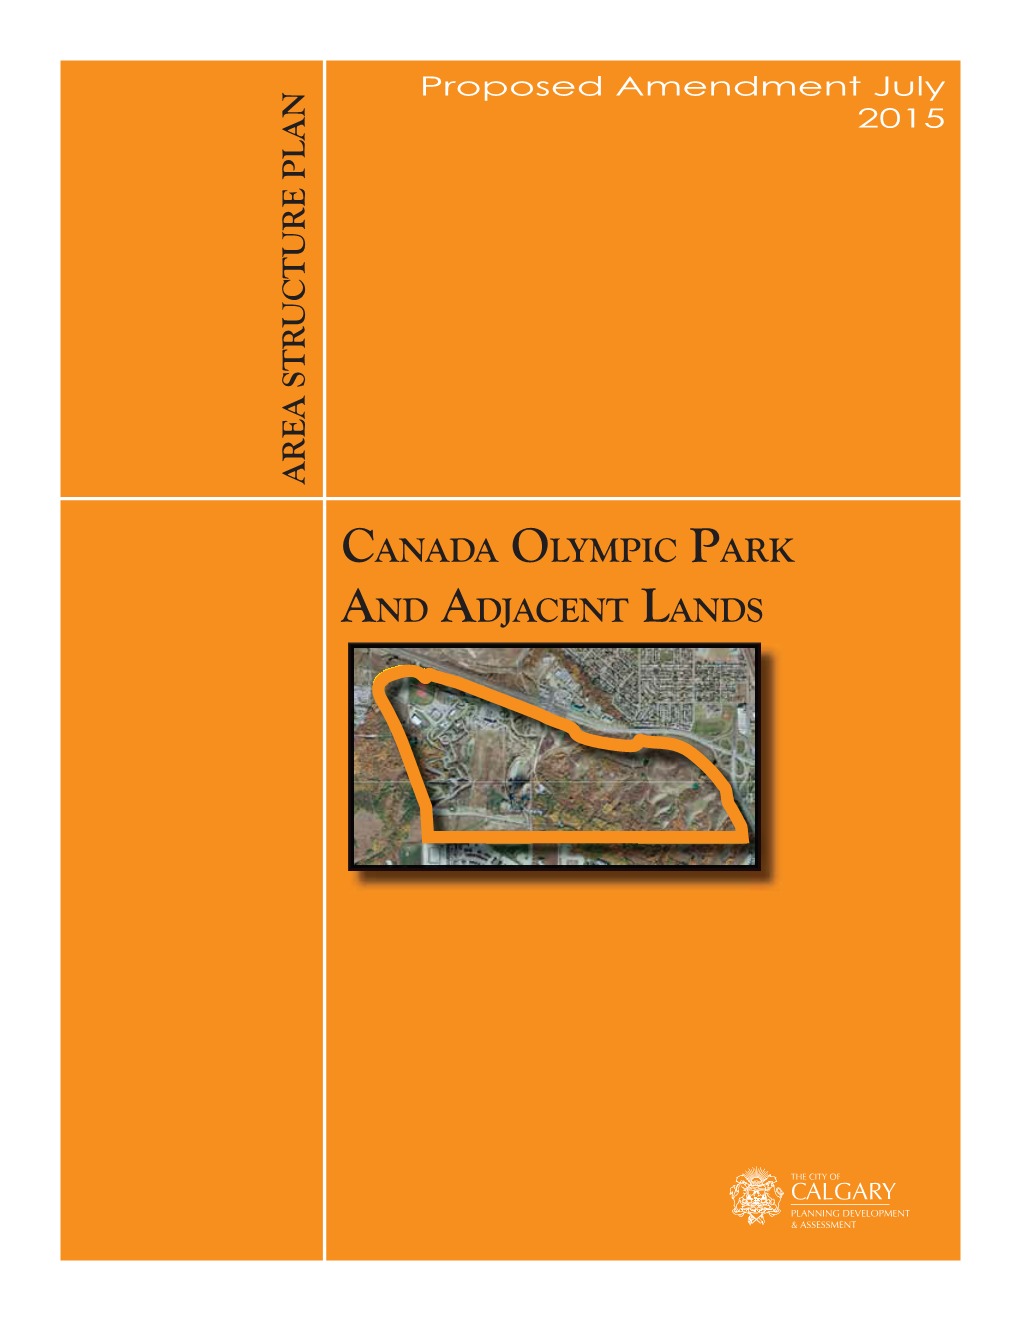 Canada Olympic Park and Adjacent Lands